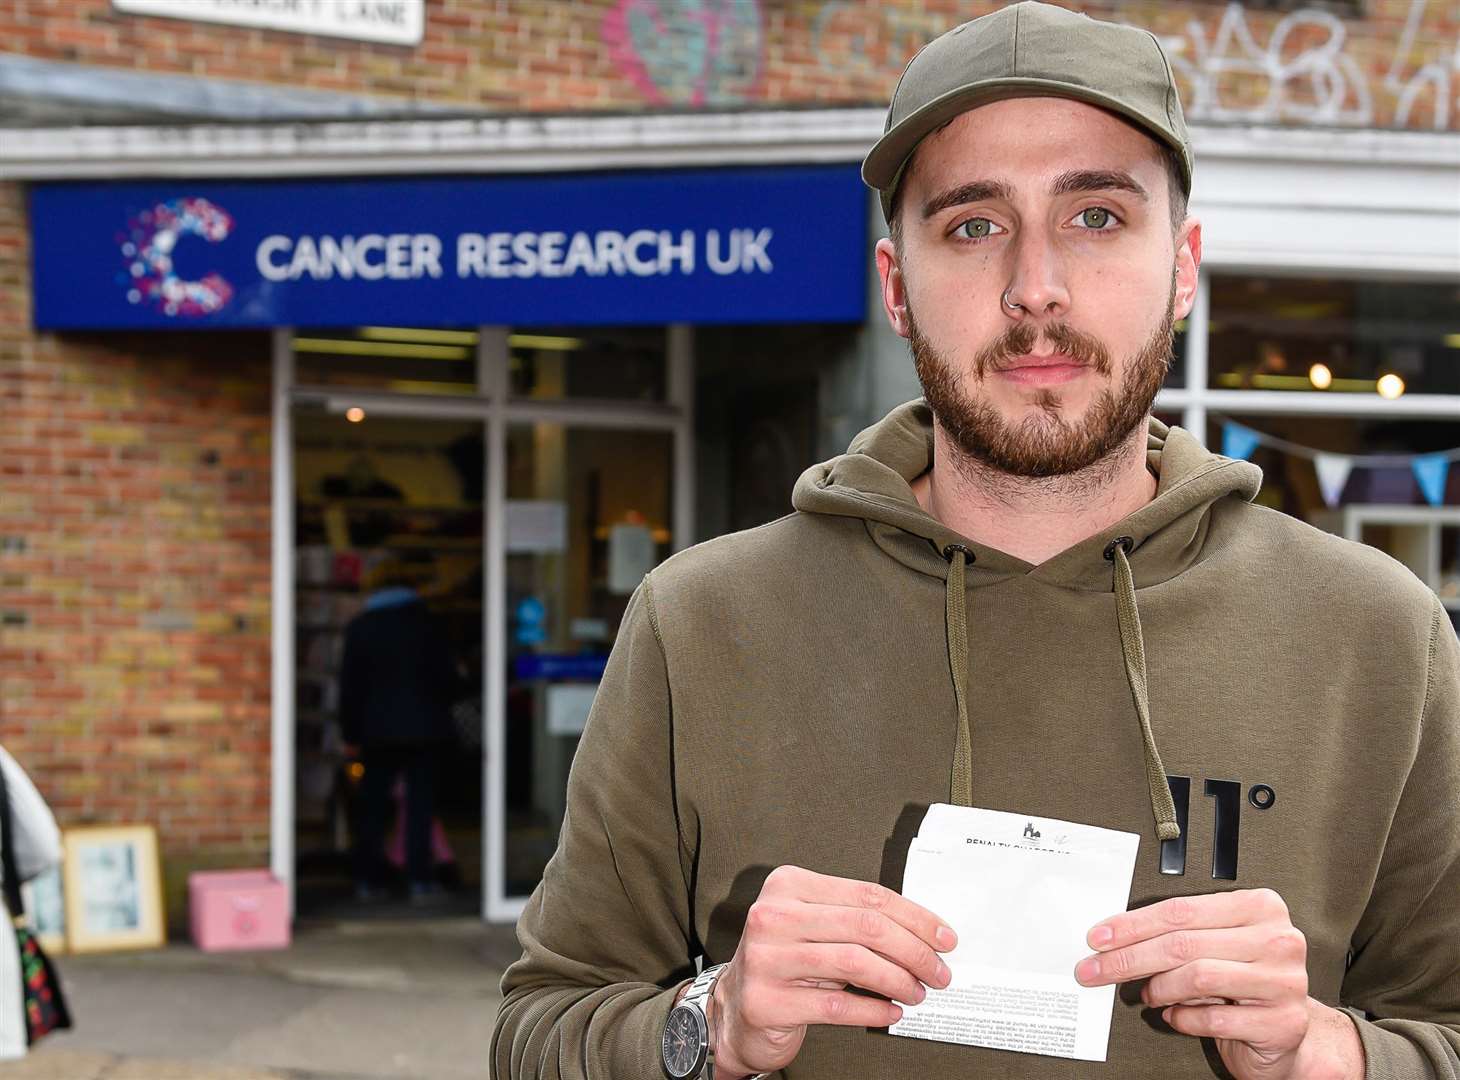 Steven Gillham was given a parking ticket while donating to the Cancer Research charity shop in Canterbury. Picture: Alan Langley